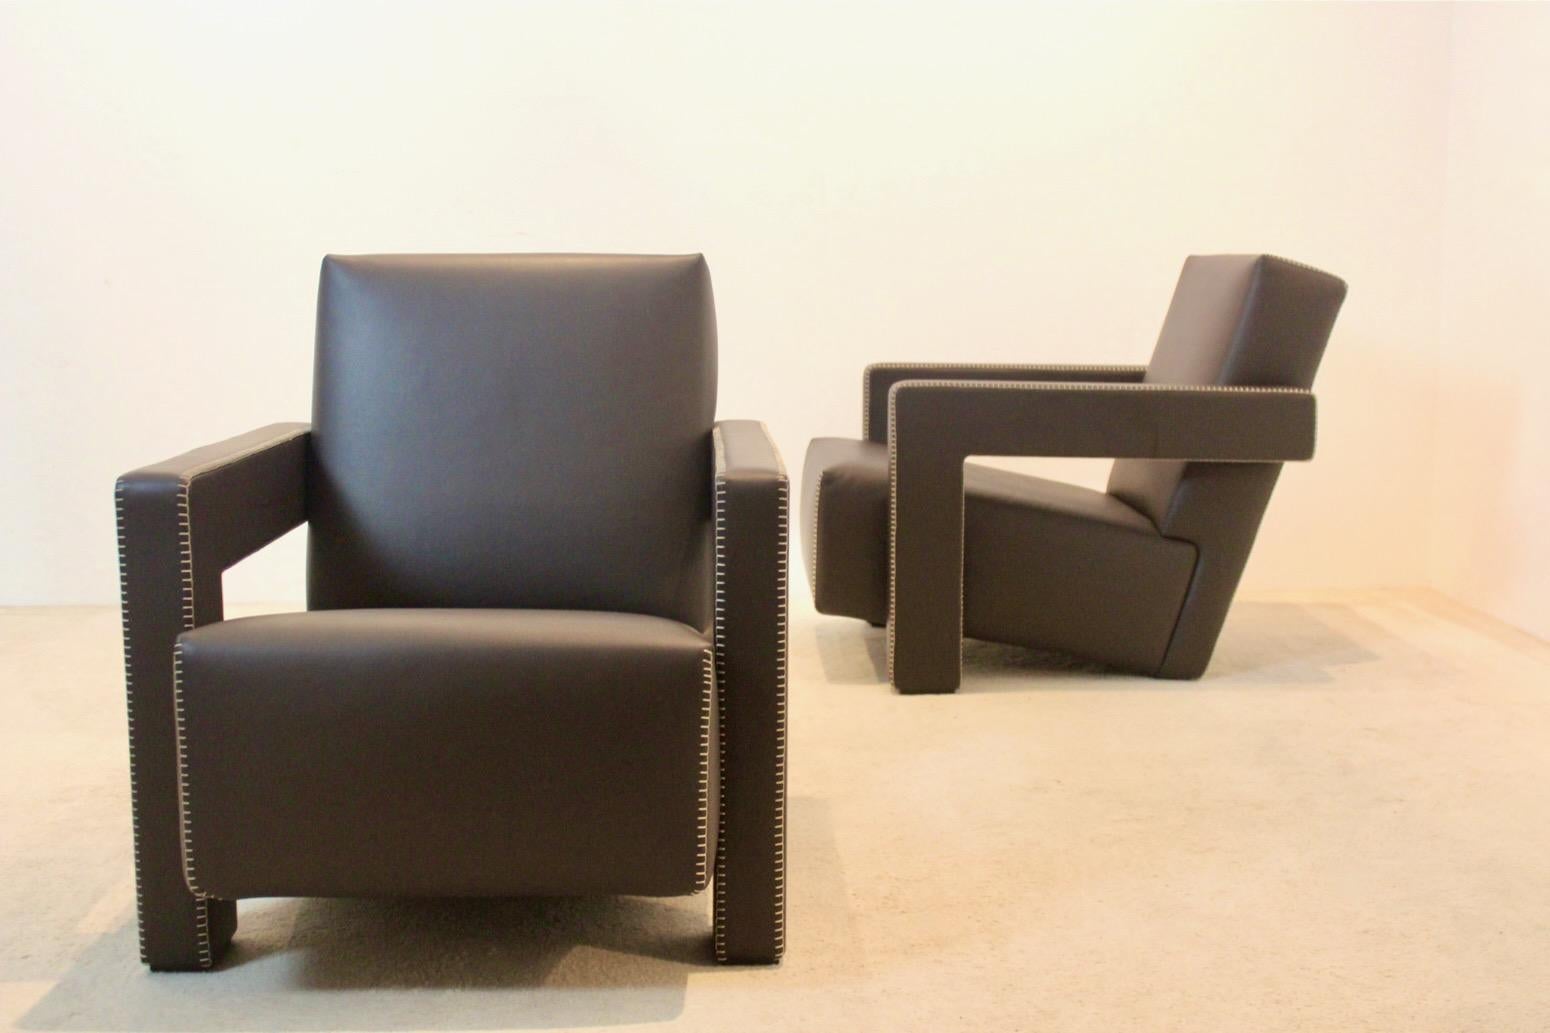 De Stijl Chocolate Brown Leather ‘Utrecht’ Lounge Chairs by Gerrit Rietveld for Cassina For Sale